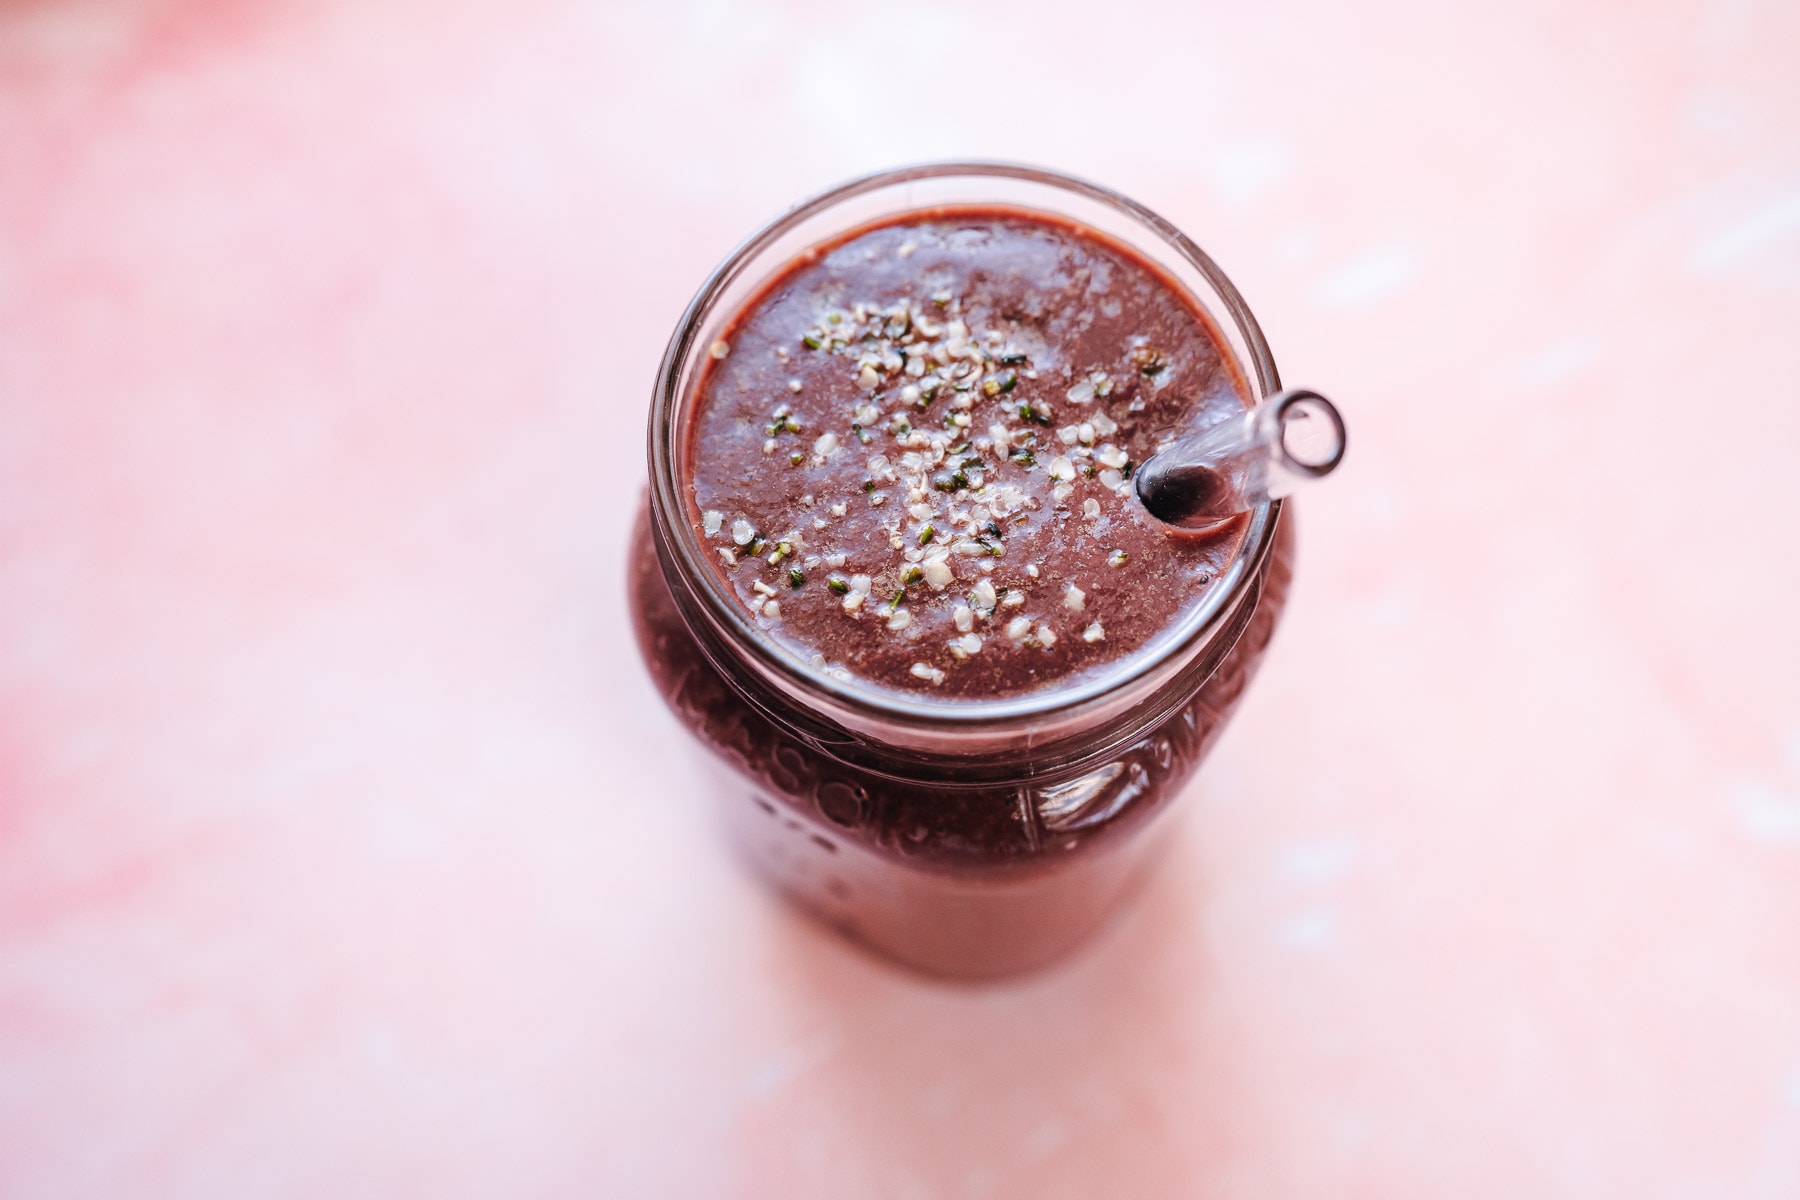 A Mason jar filled with purple smoothie sprinkled with white seeds.